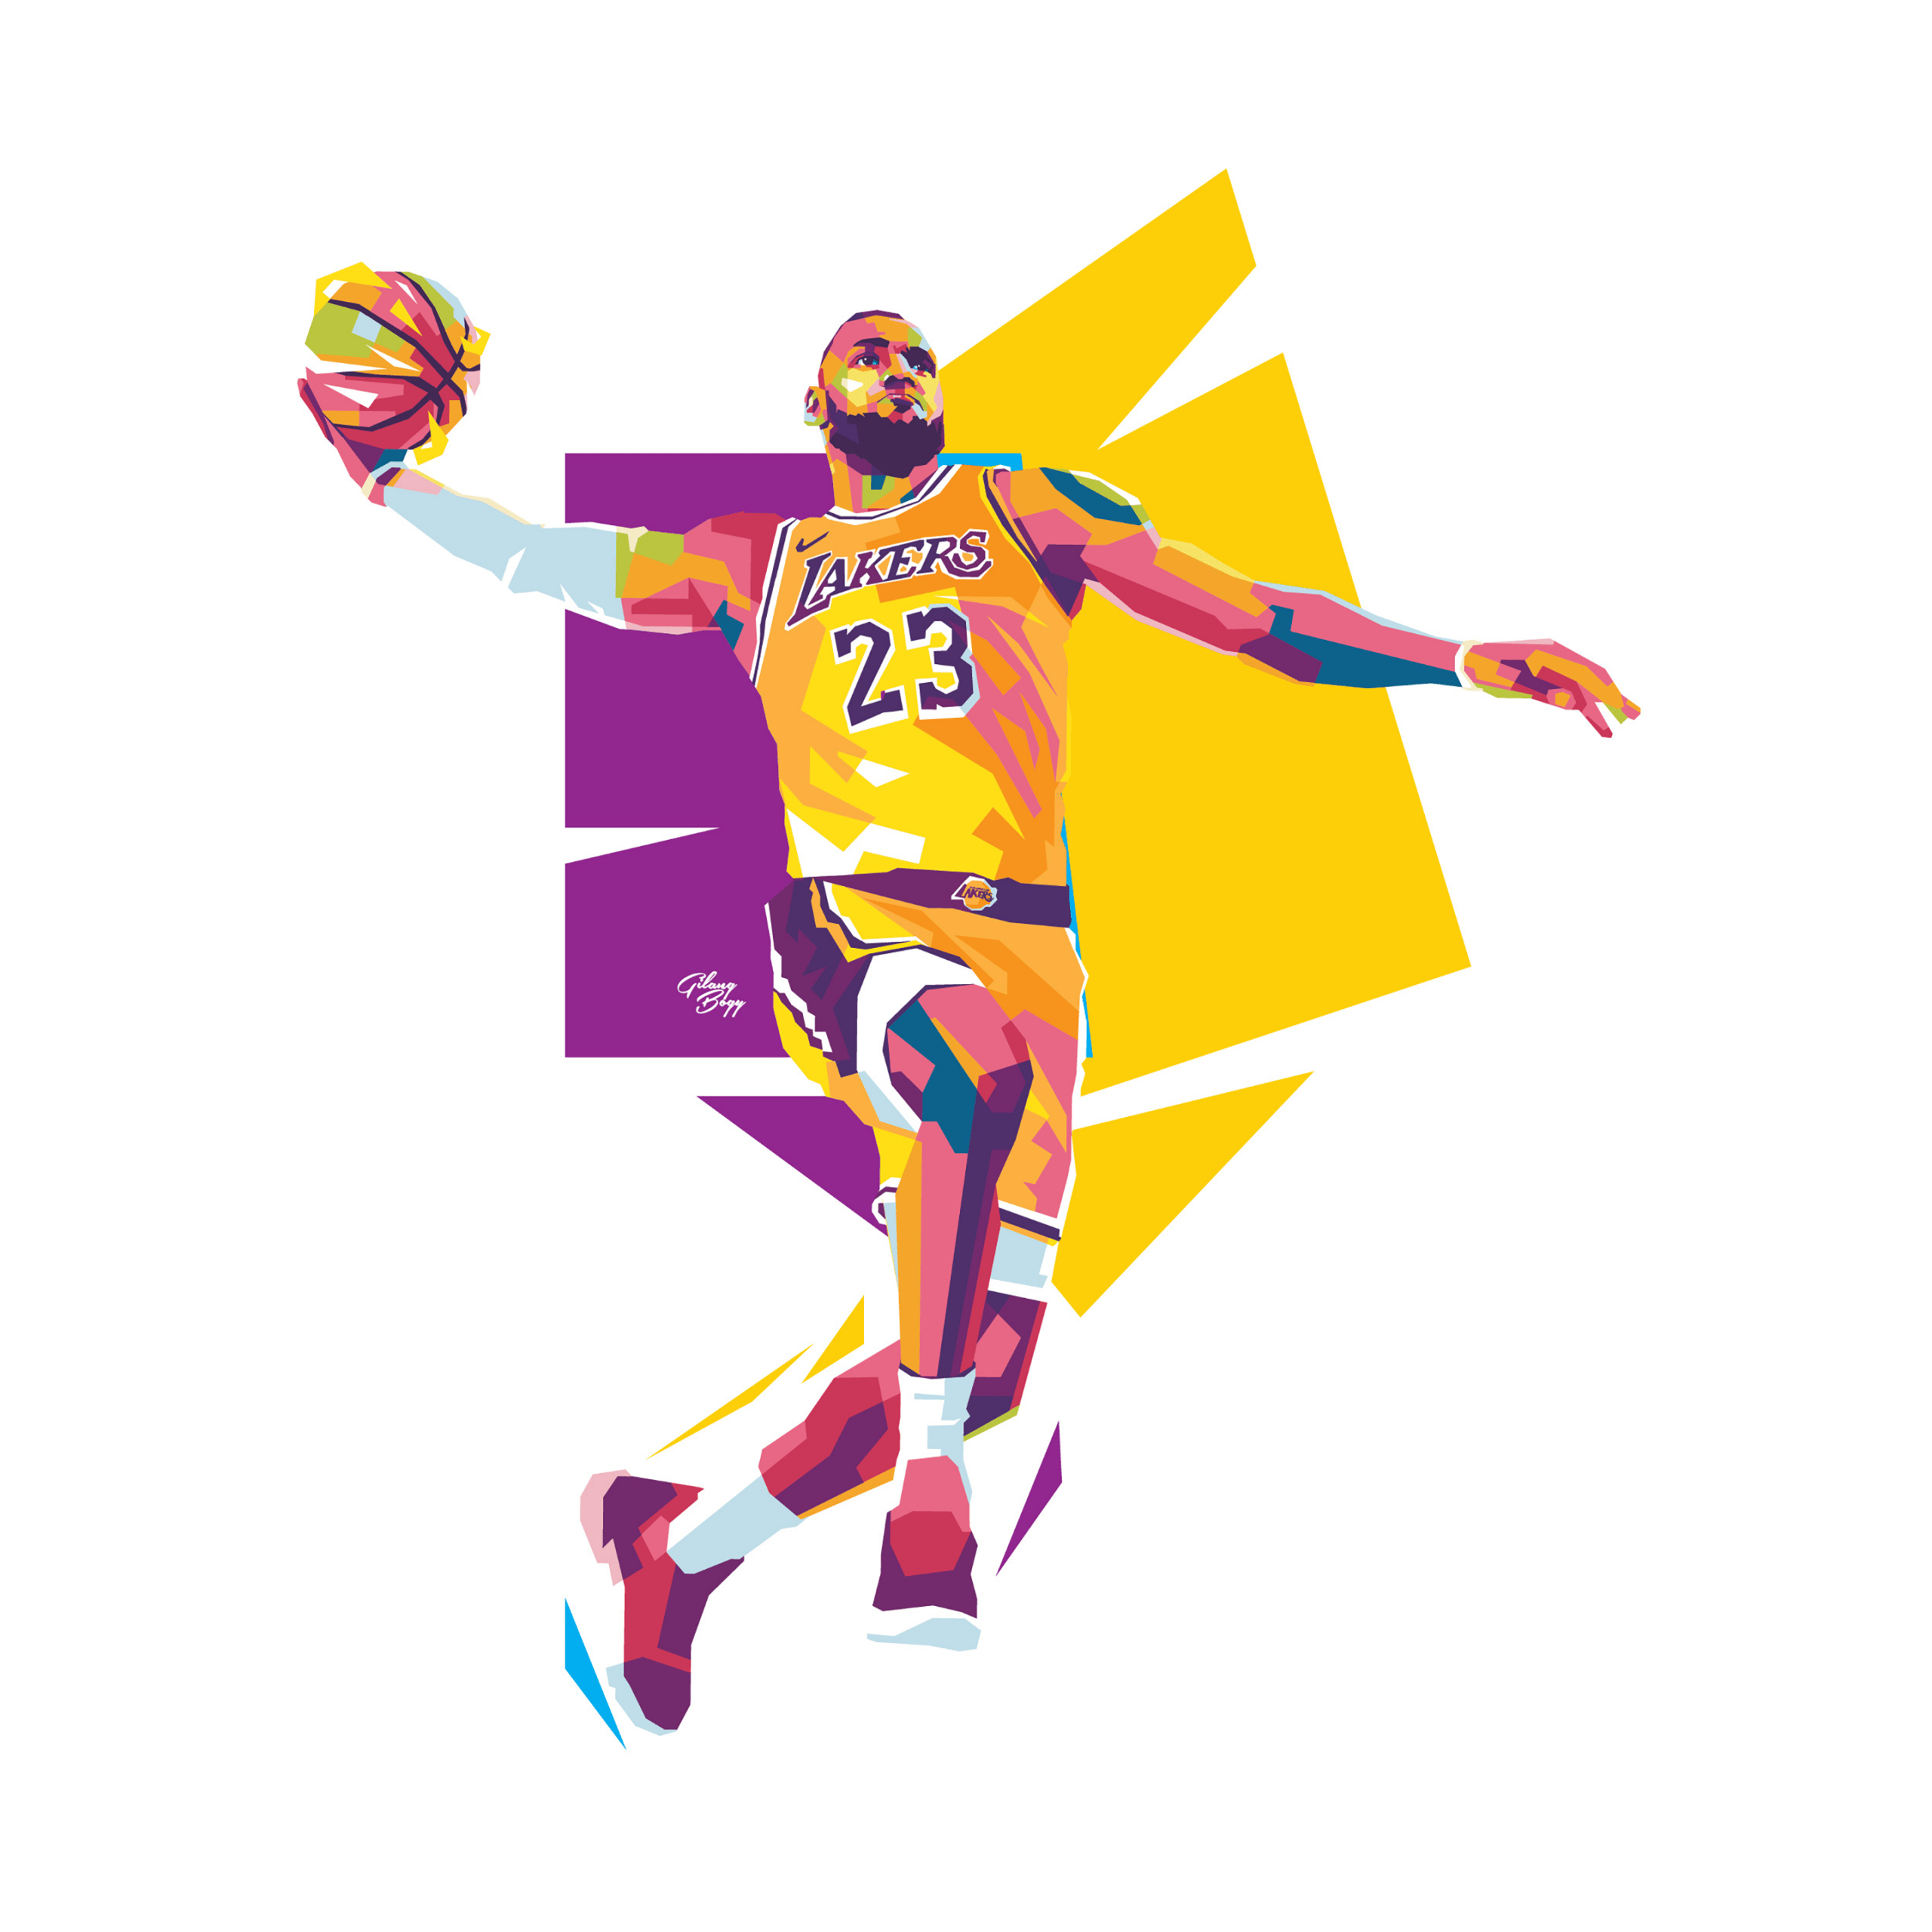 Lebron James, Los Angeles Lakers, in colorful low poly pop art style. Perfect for a basketball fan or player. - Los Angeles Lakers, Lebron James